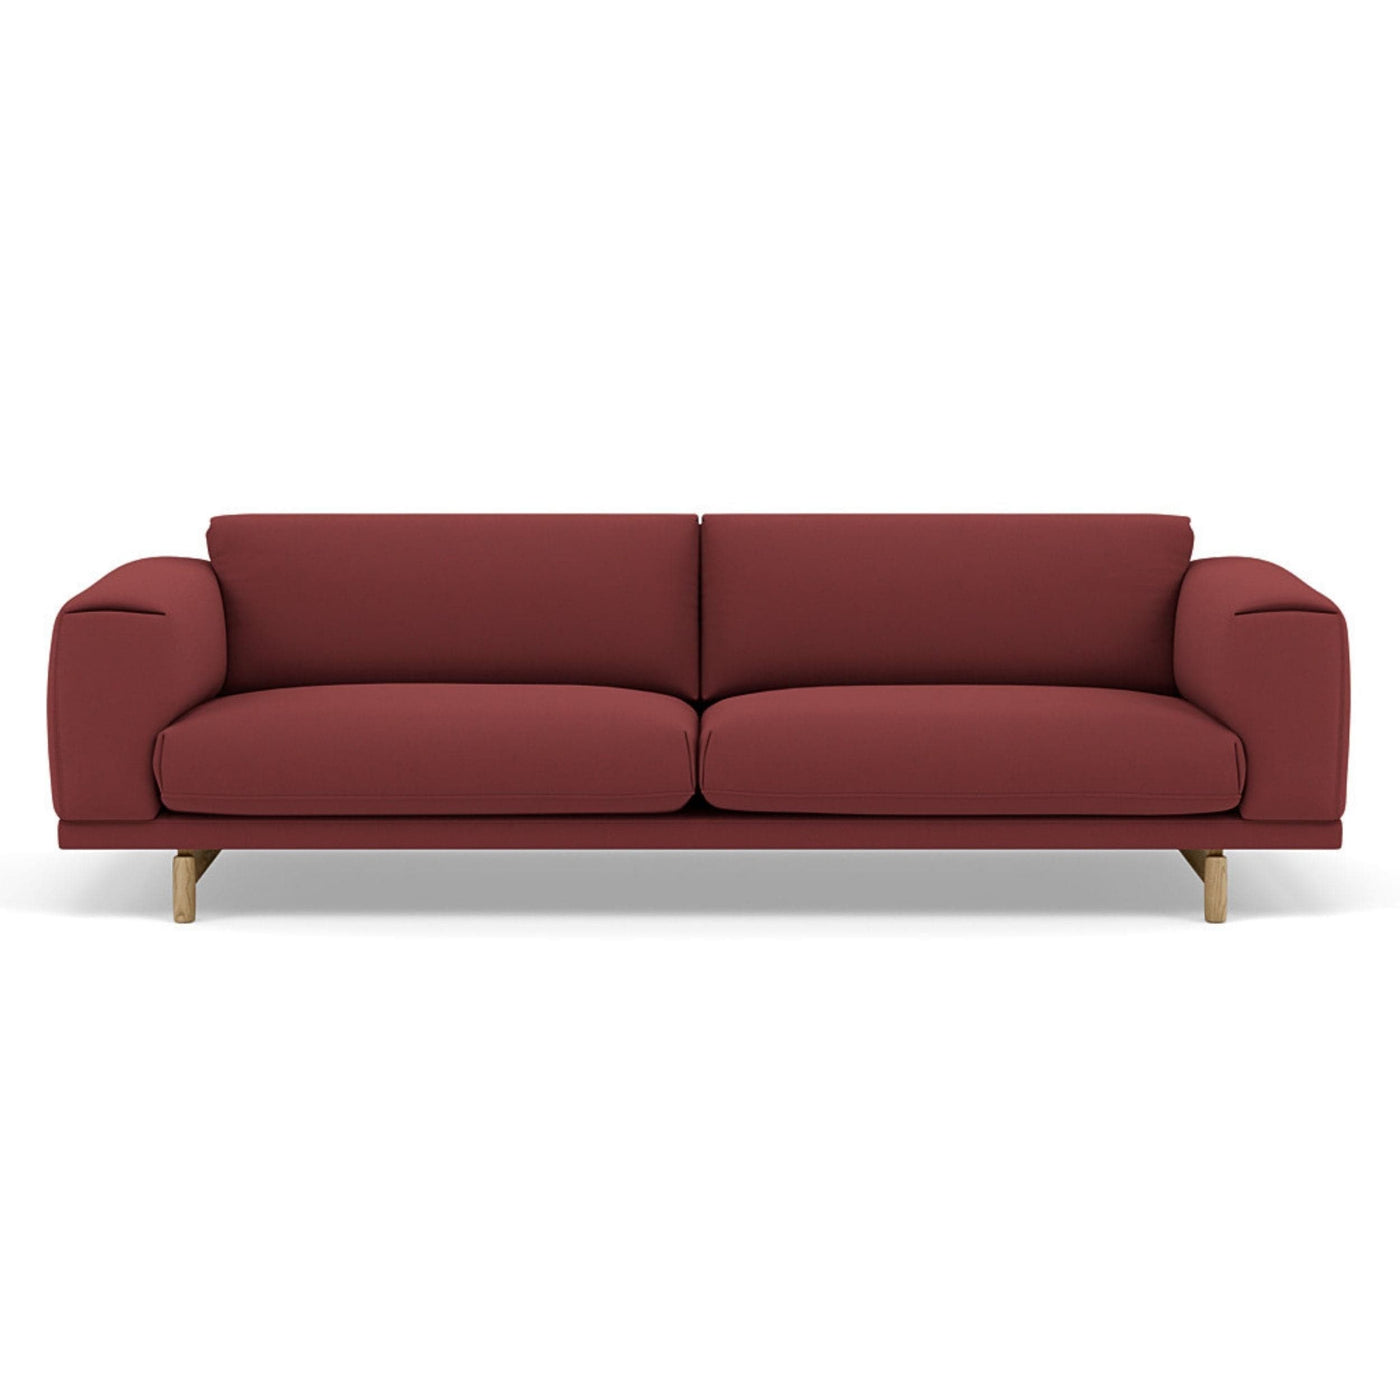 Muuto Rest Sofa Rime 591 wine/red fabric. Made to order from someday designs. #colour_rime-591